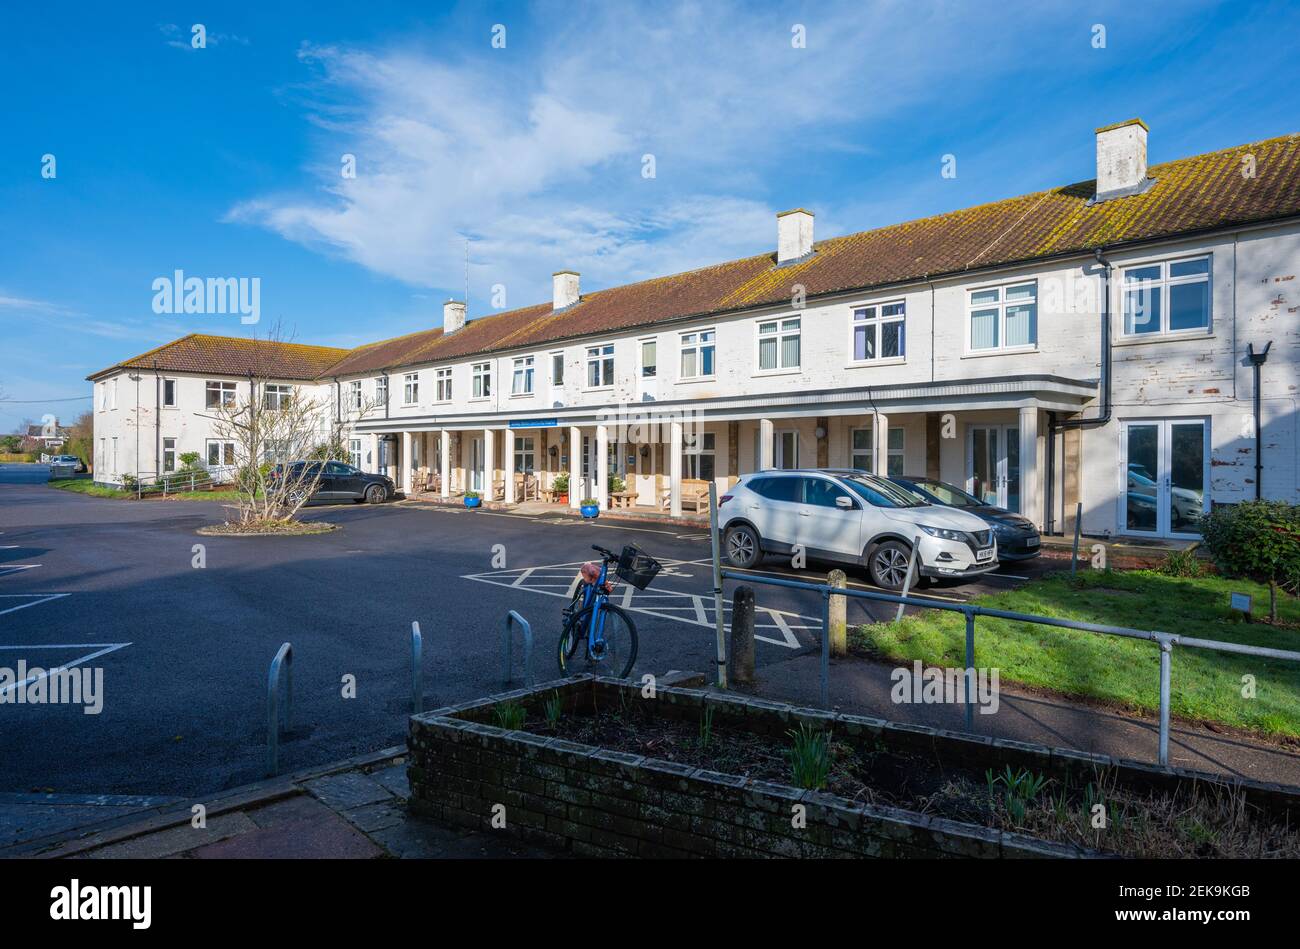 Zachary Merton Community Hospital, an old 2 storey NHS British hospital building first opened in 1937 in Rustington, West Sussex, England, UK. Stock Photo